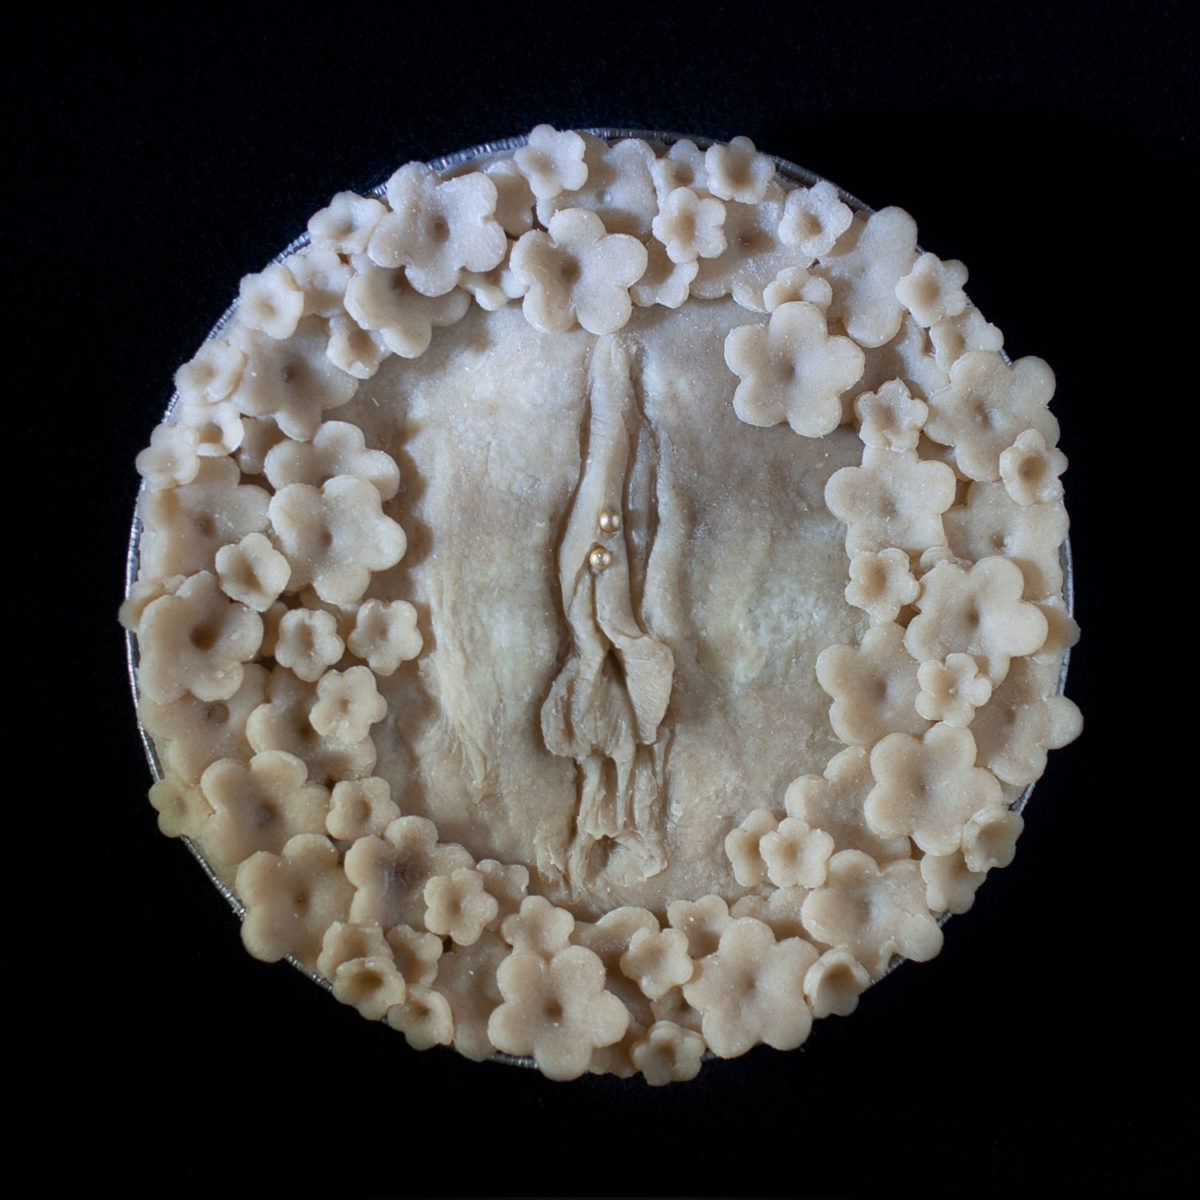 Unbaked vulva pie on a black background. This pie celebrates vulva diversity and the blossoming of each life change.